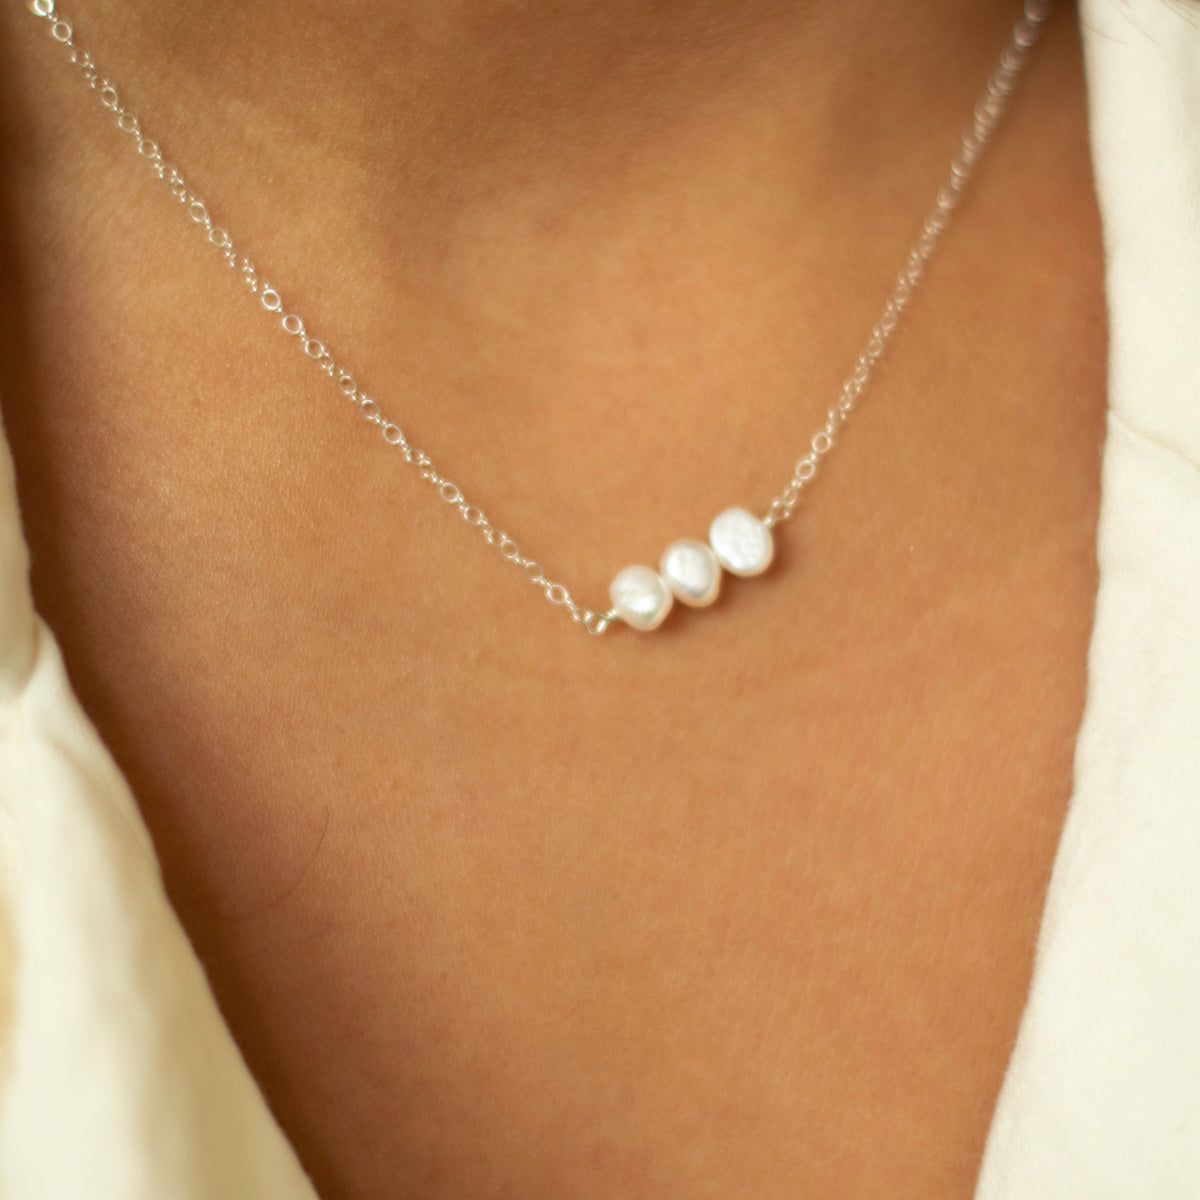 Mini String of 3 Pearls on a 925 Sterling Silver Necklace